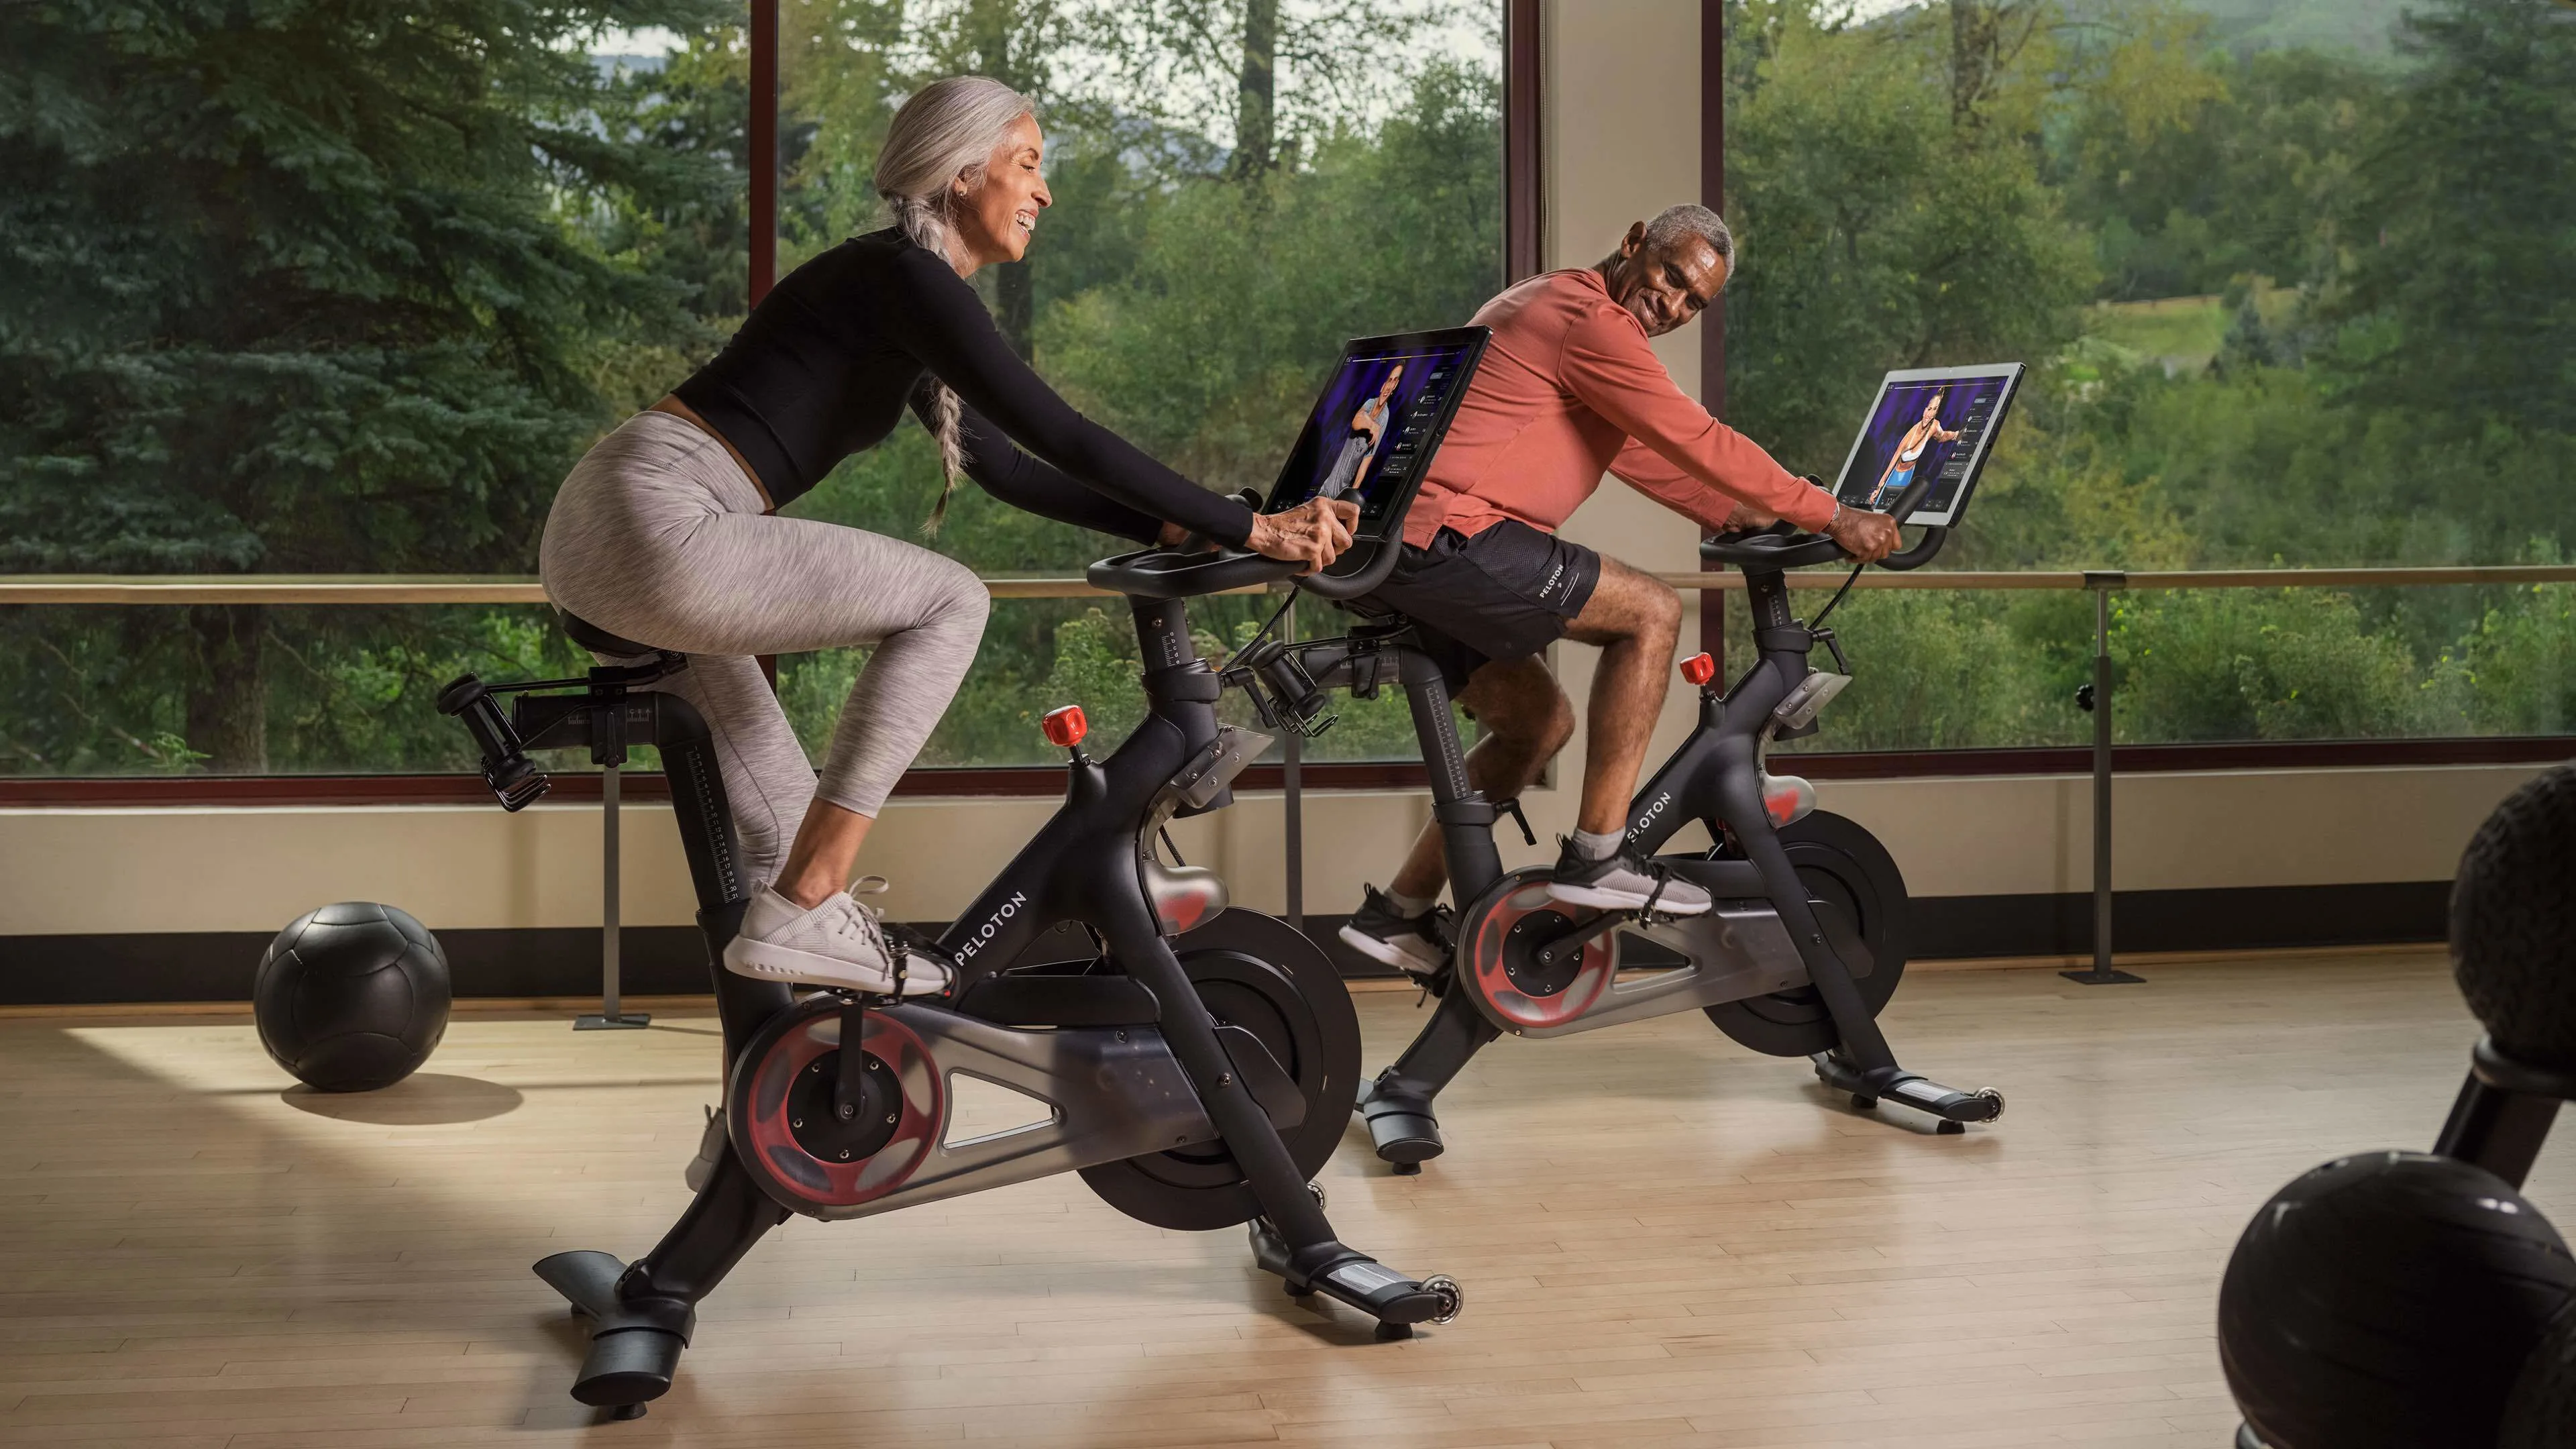 Hotel guests using Peloton stationary bikes